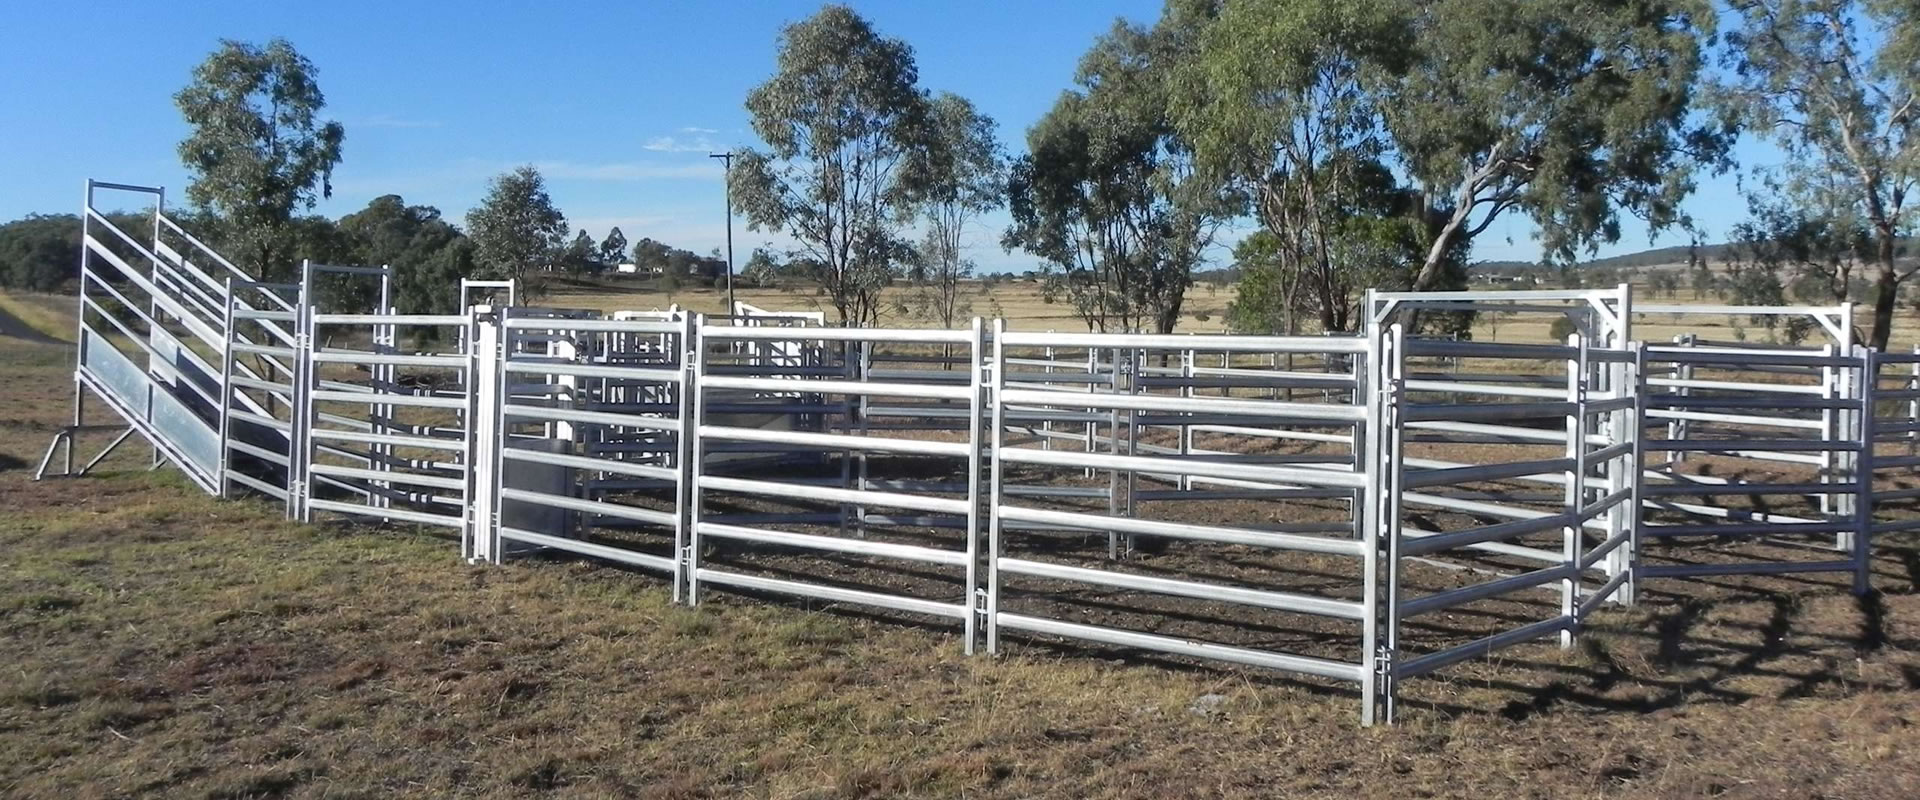 Several pieces of corral panels and loading ramp on the grassland.